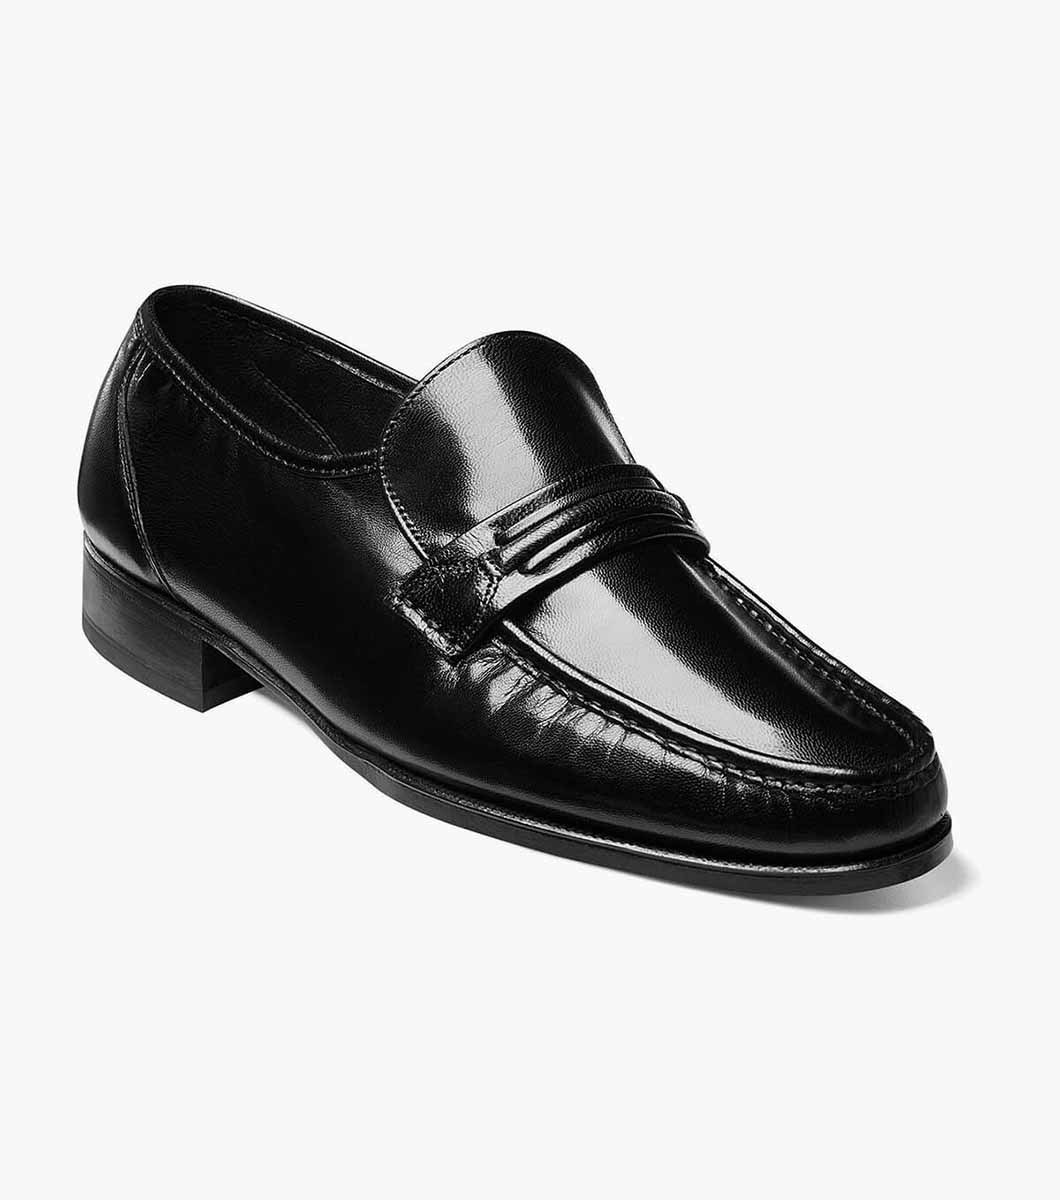 florsheim shoes loafers